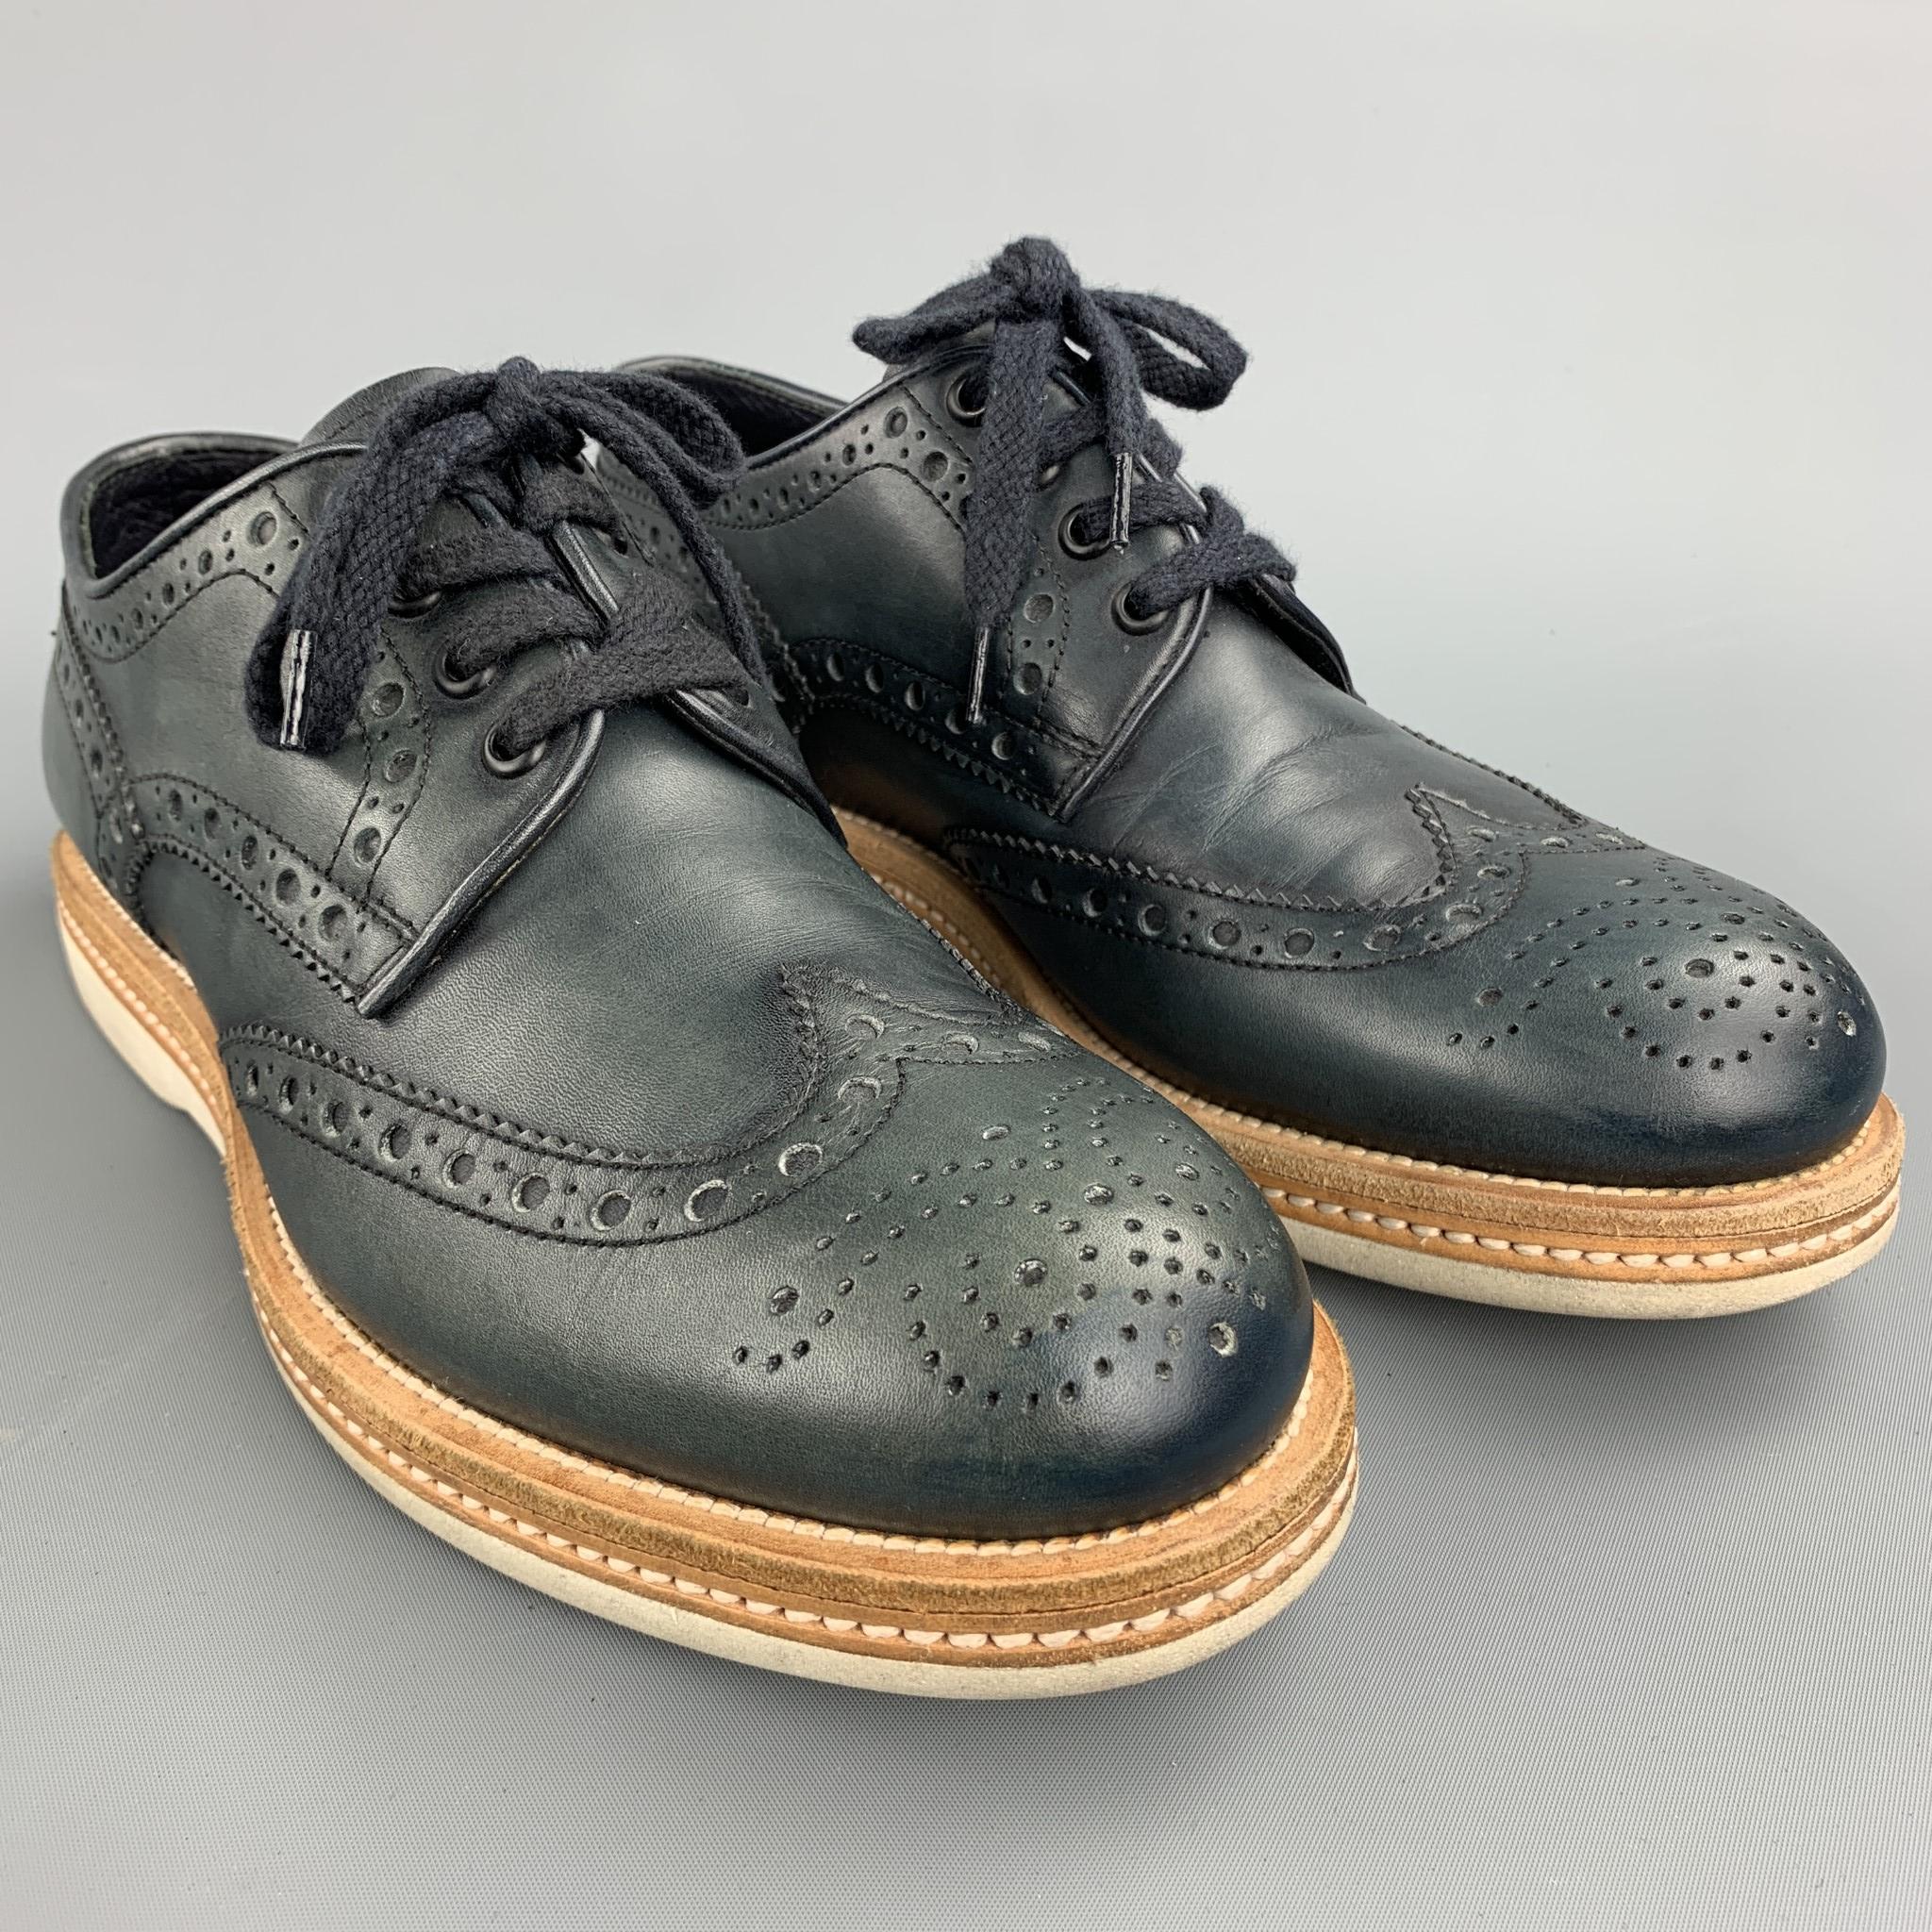 SANTONI lace up shoes comes in a navy perforated leather featuring a wingtip, contrast stitching, a rubber sole. Minor wear on the sole. Made in Italy.

Good Pre-Owned Condition.
Marked: 7 F

Outsole:
 
11 in. x 4 in. 